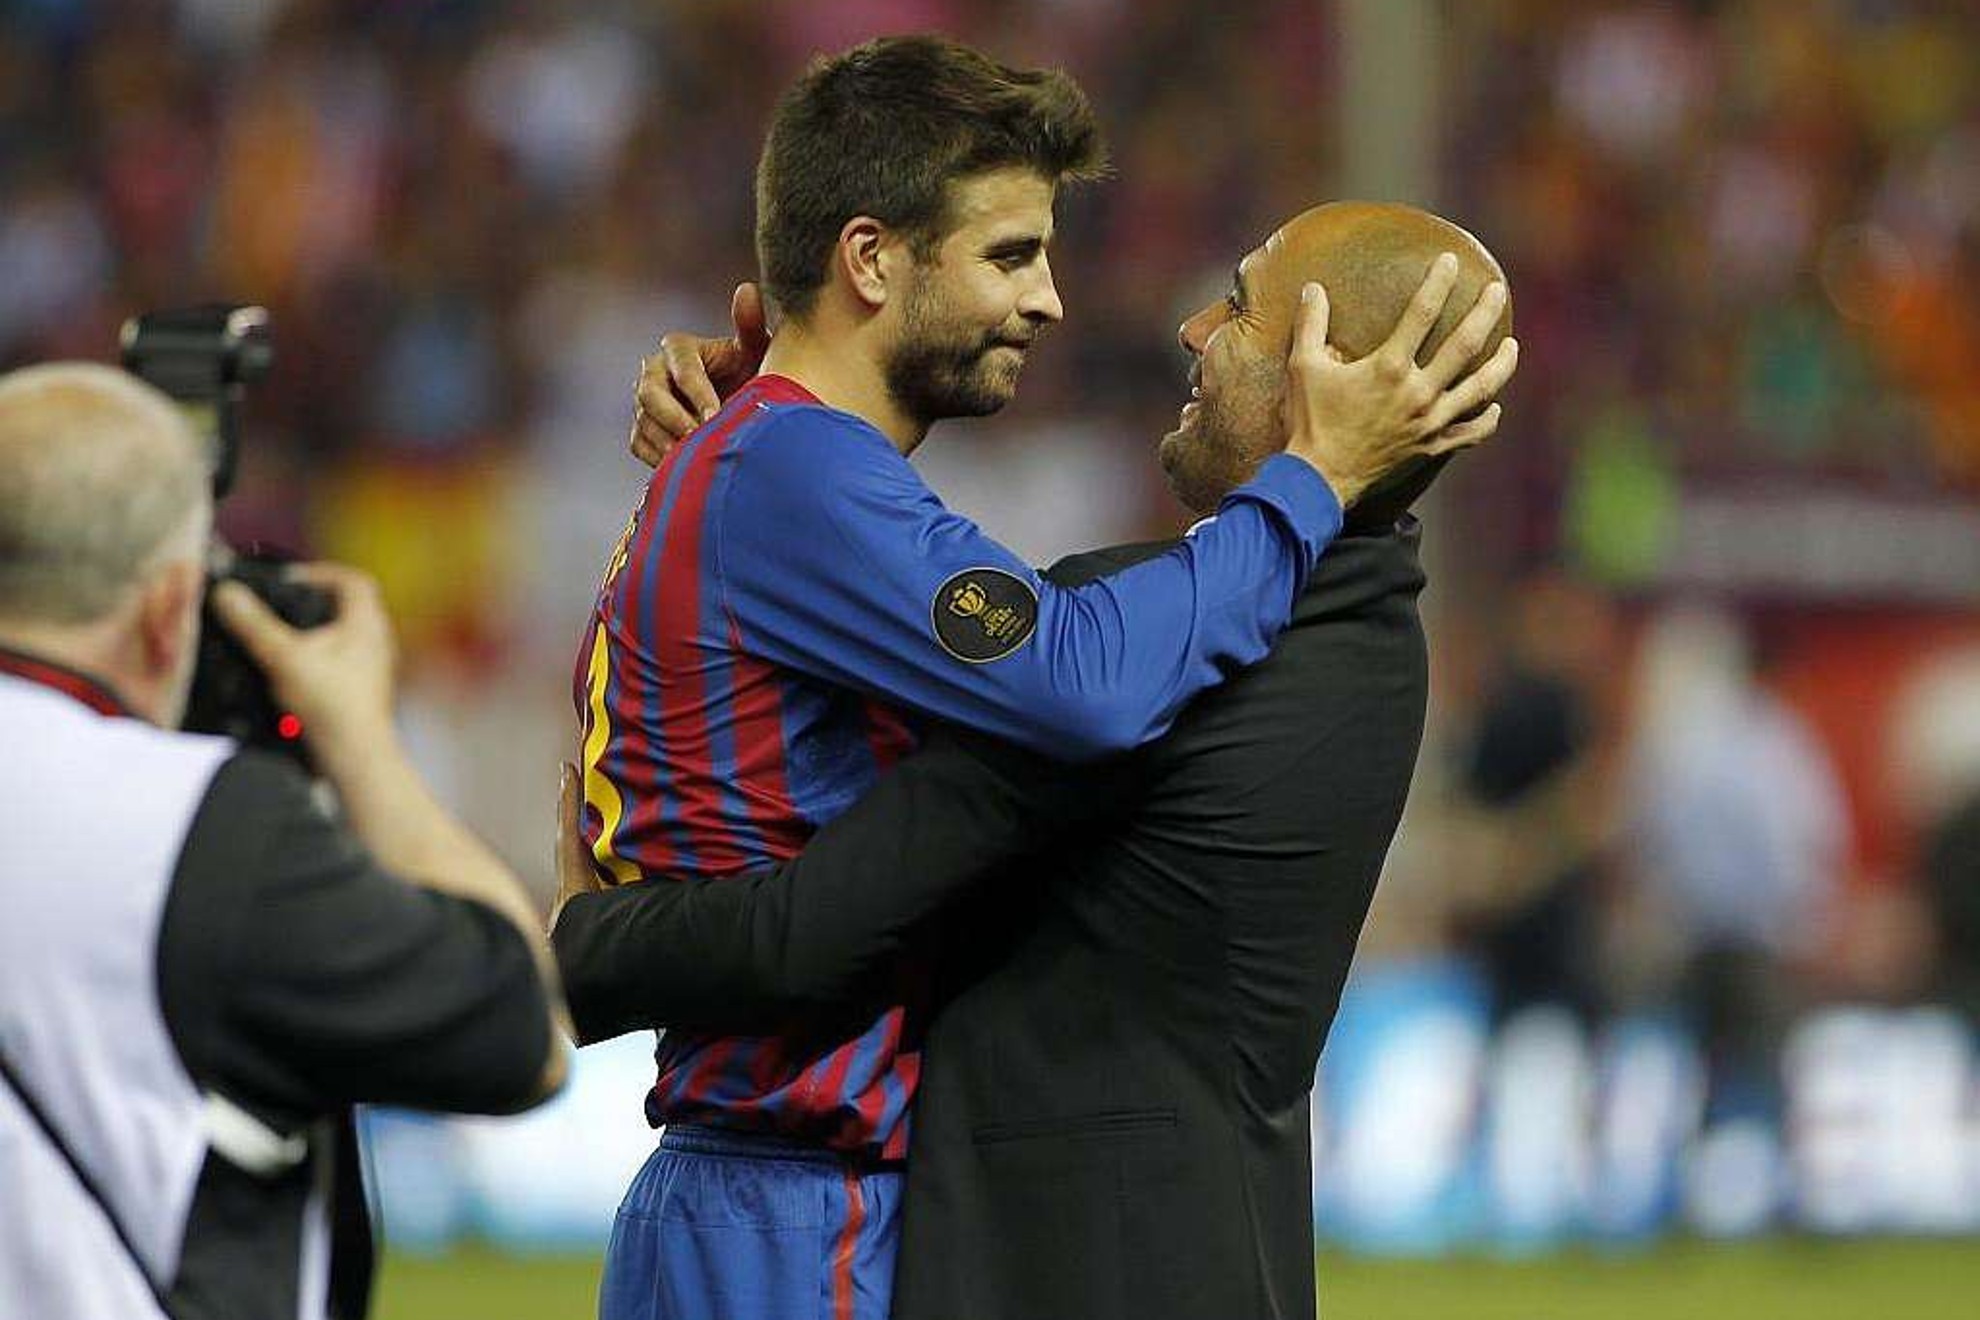 Guardiola says it was an 'honour' to manage 'big game' Pique